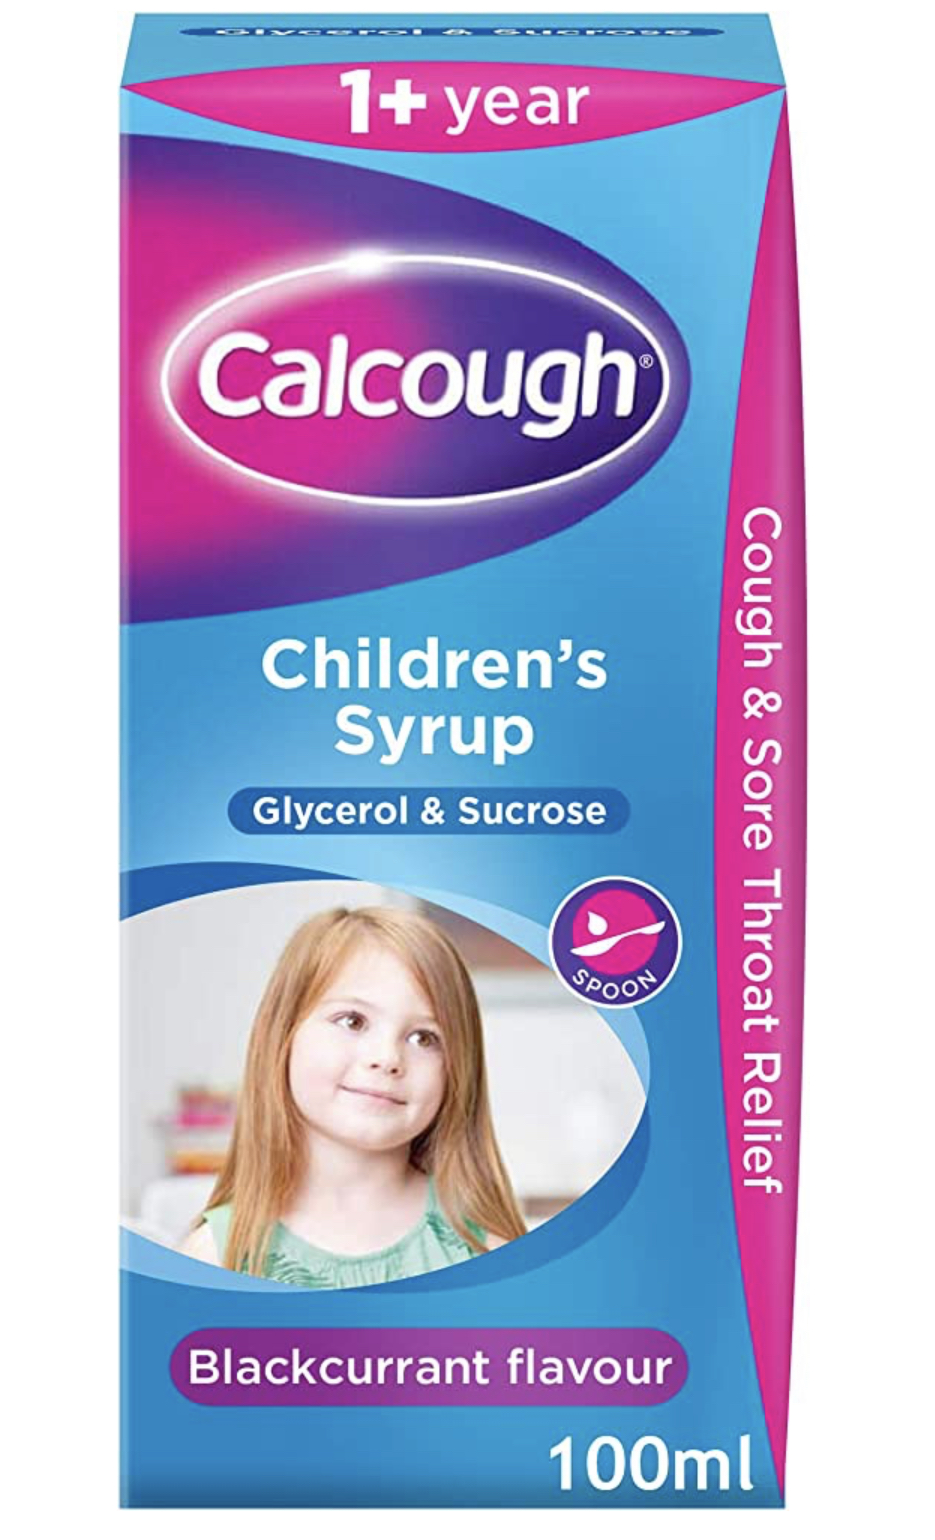 1681146968_Calcough20Children27s20Syrup2C20Cough202620Sore20Throat20ReE280A6202.png